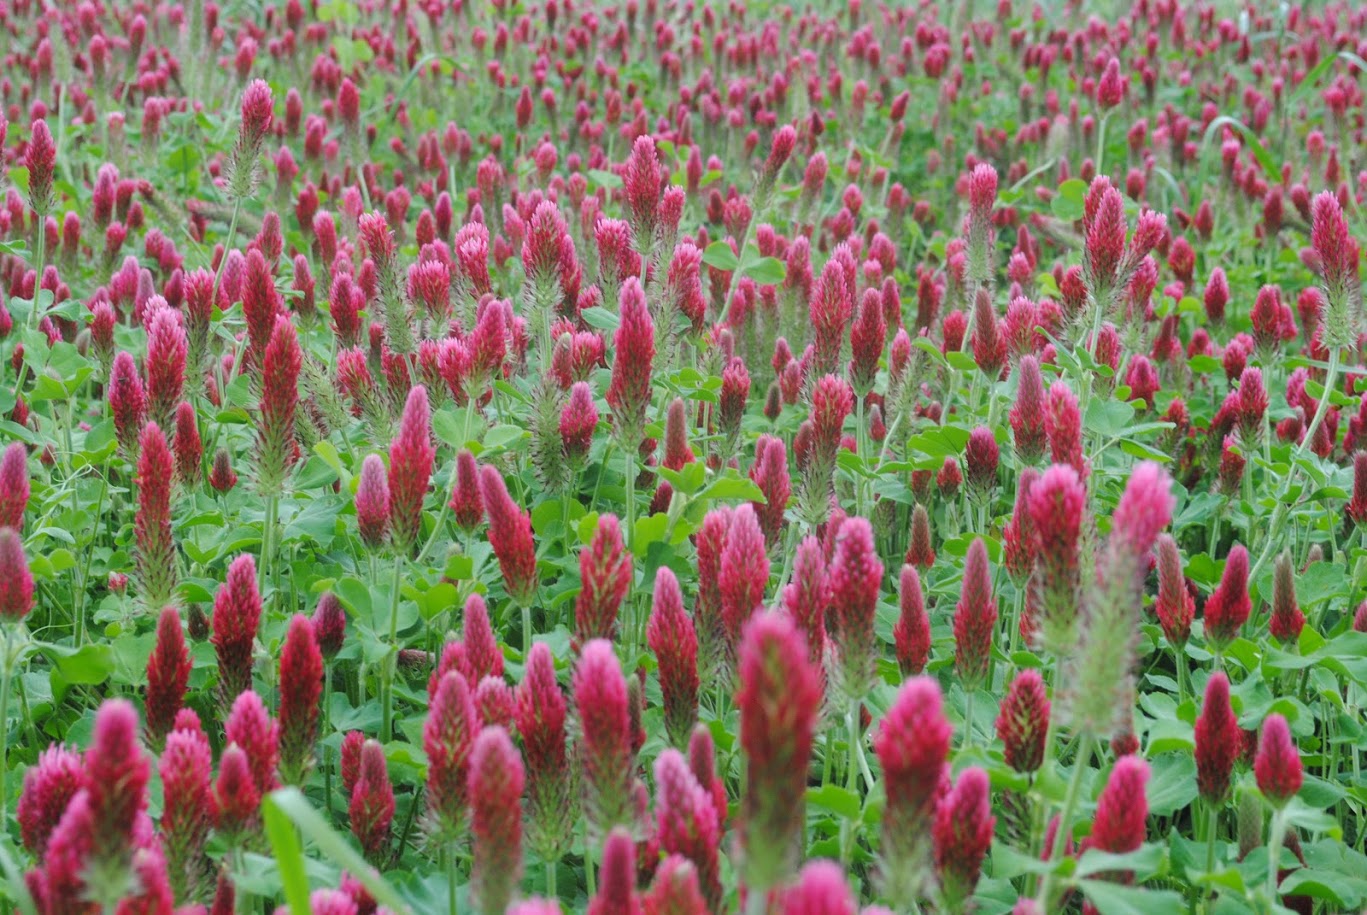 Crimson Clover and cereal rye